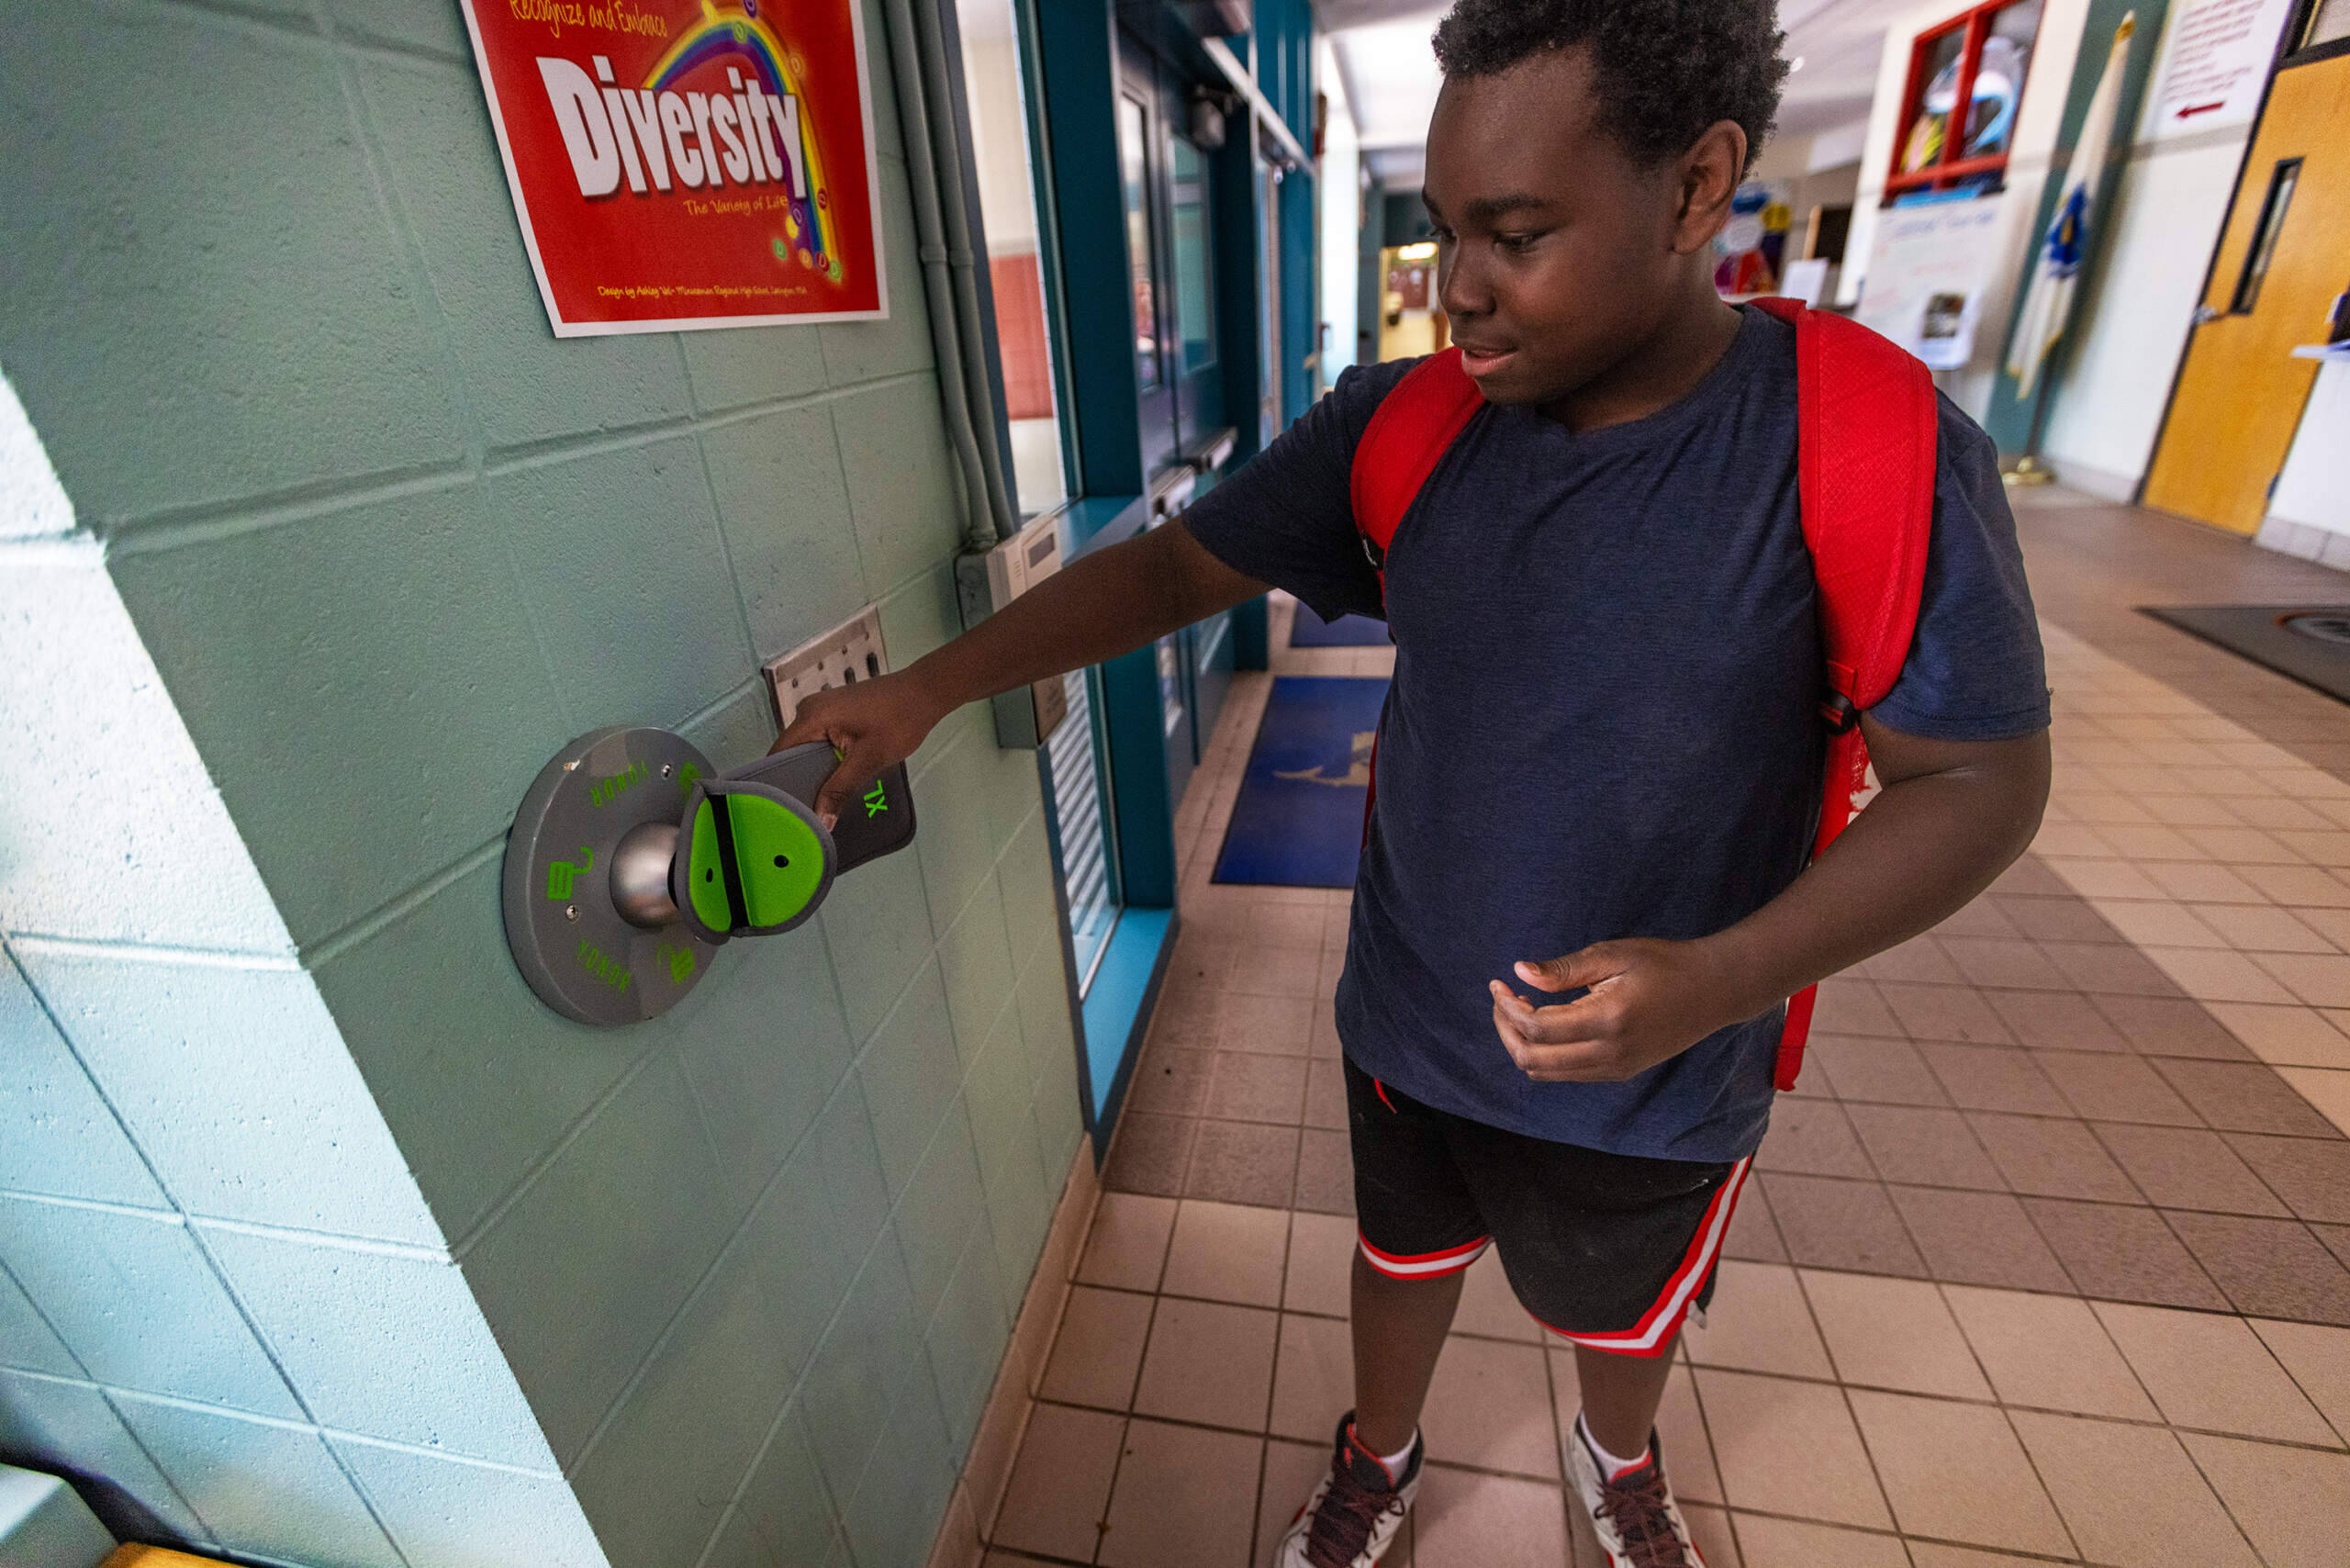 Eighth grader Tyri Bascomb opens his Yondr pouch by tapping it on the unlocking base at the Collins Middle School entrance. (Jesse Costa/WBUR)